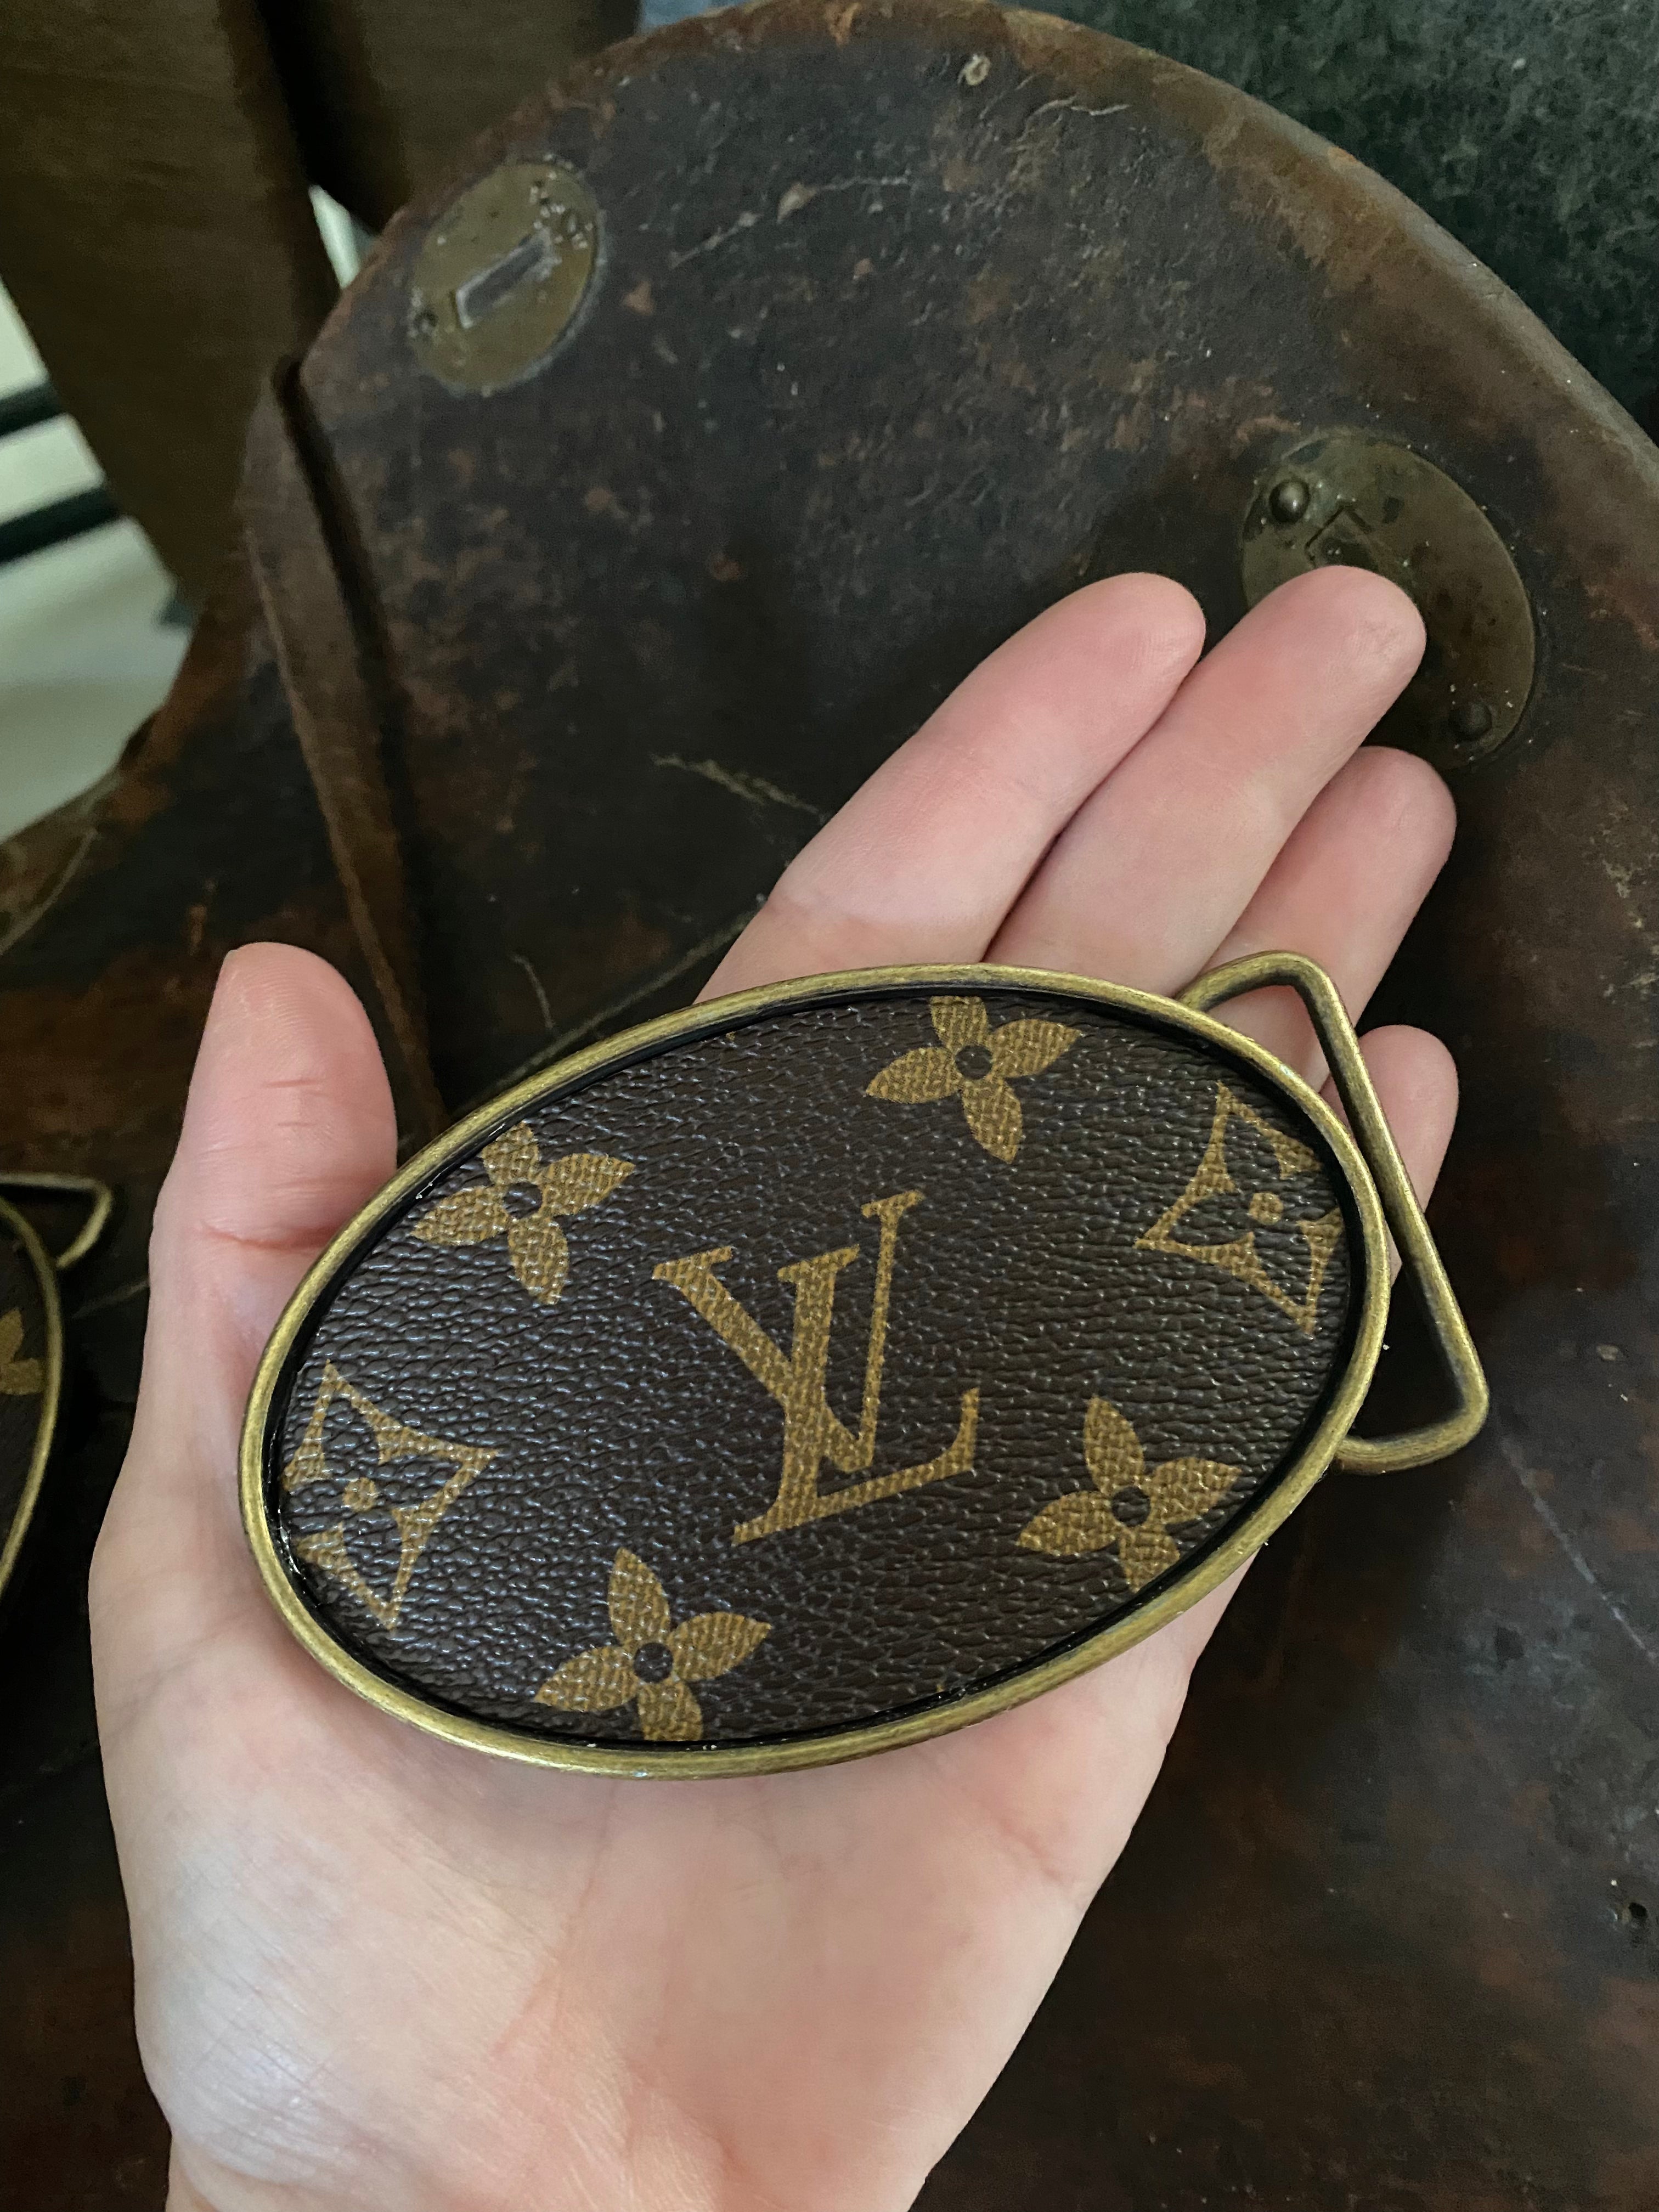 upcycled repurposed louis vuitton